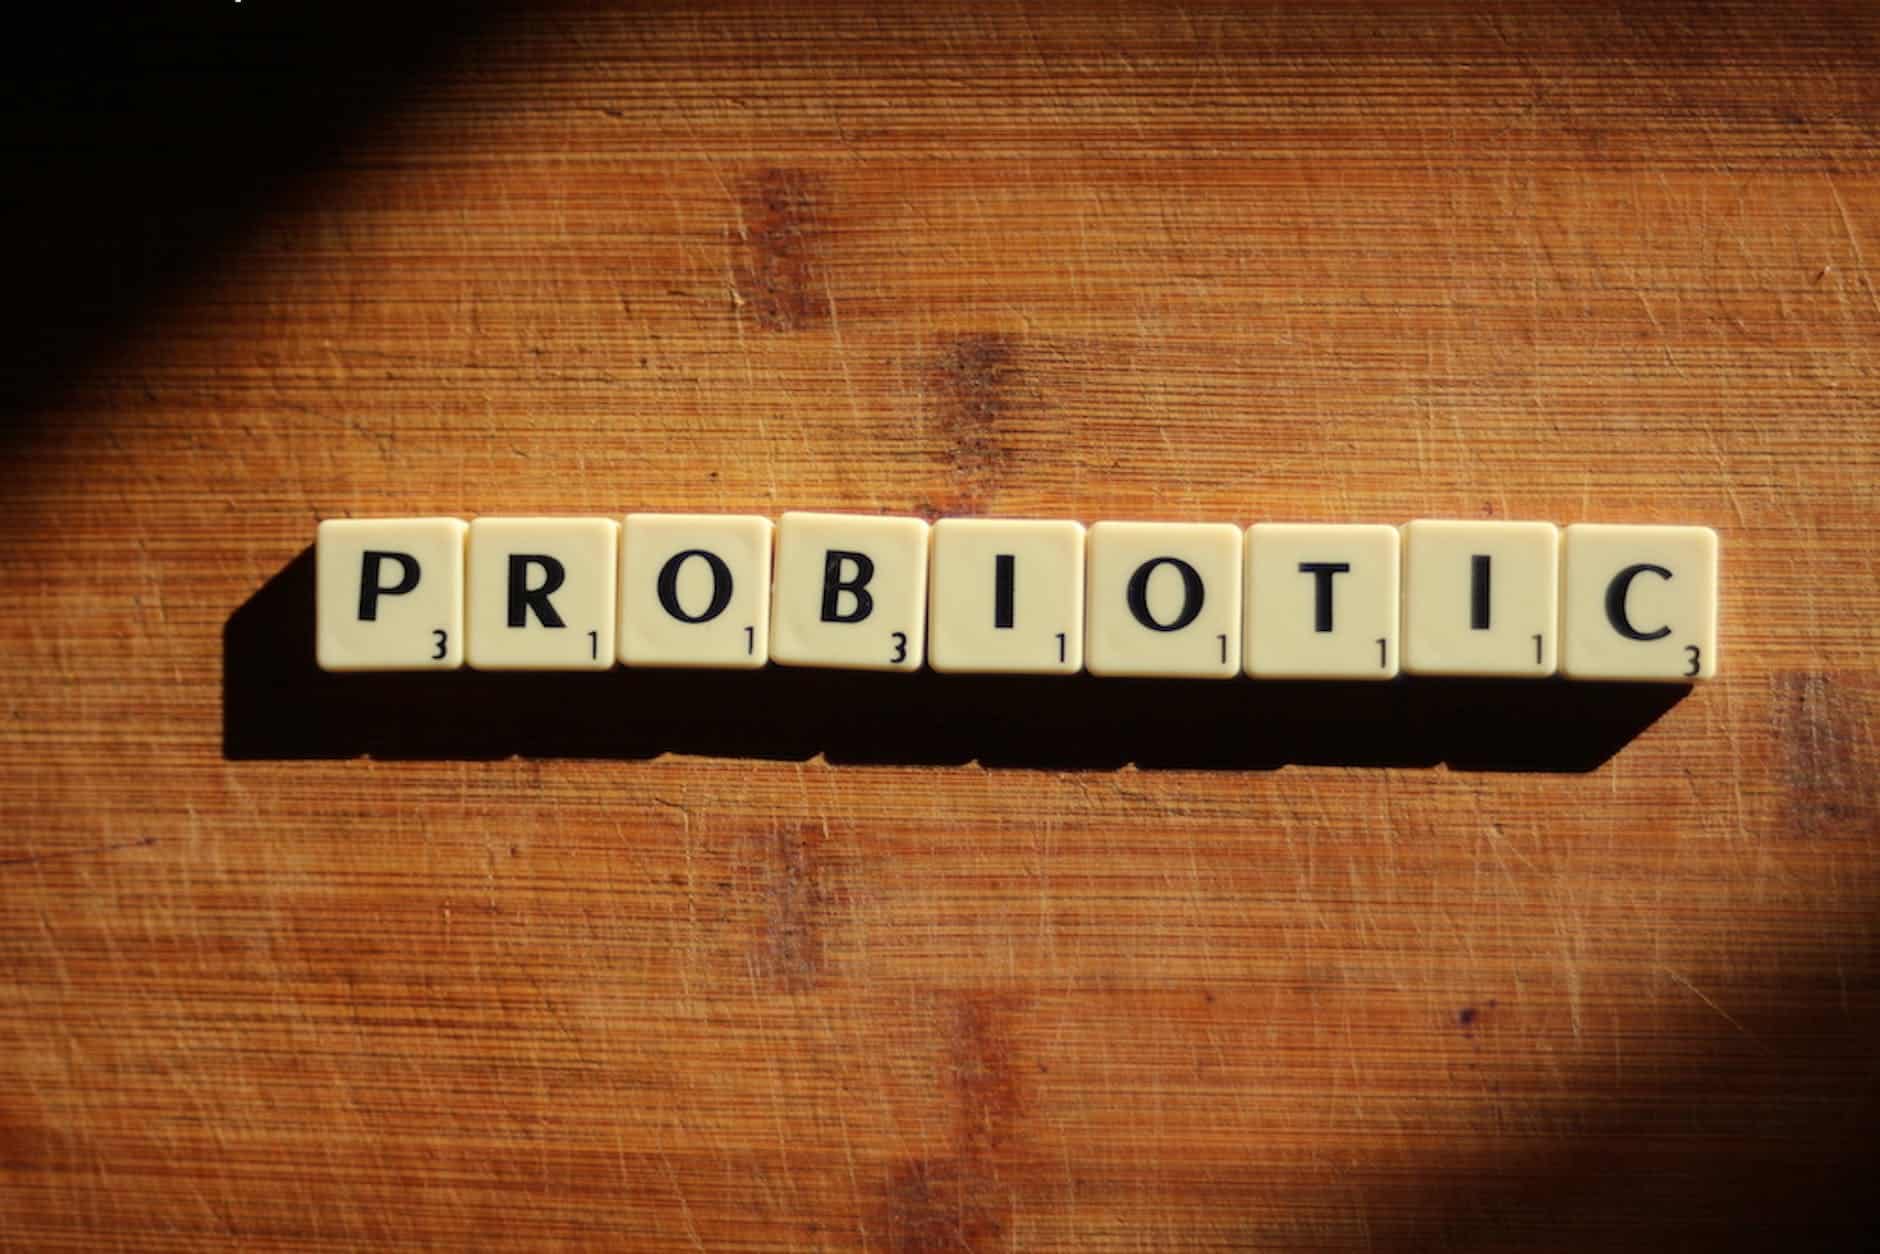 “Why You Should Take Probiotics”